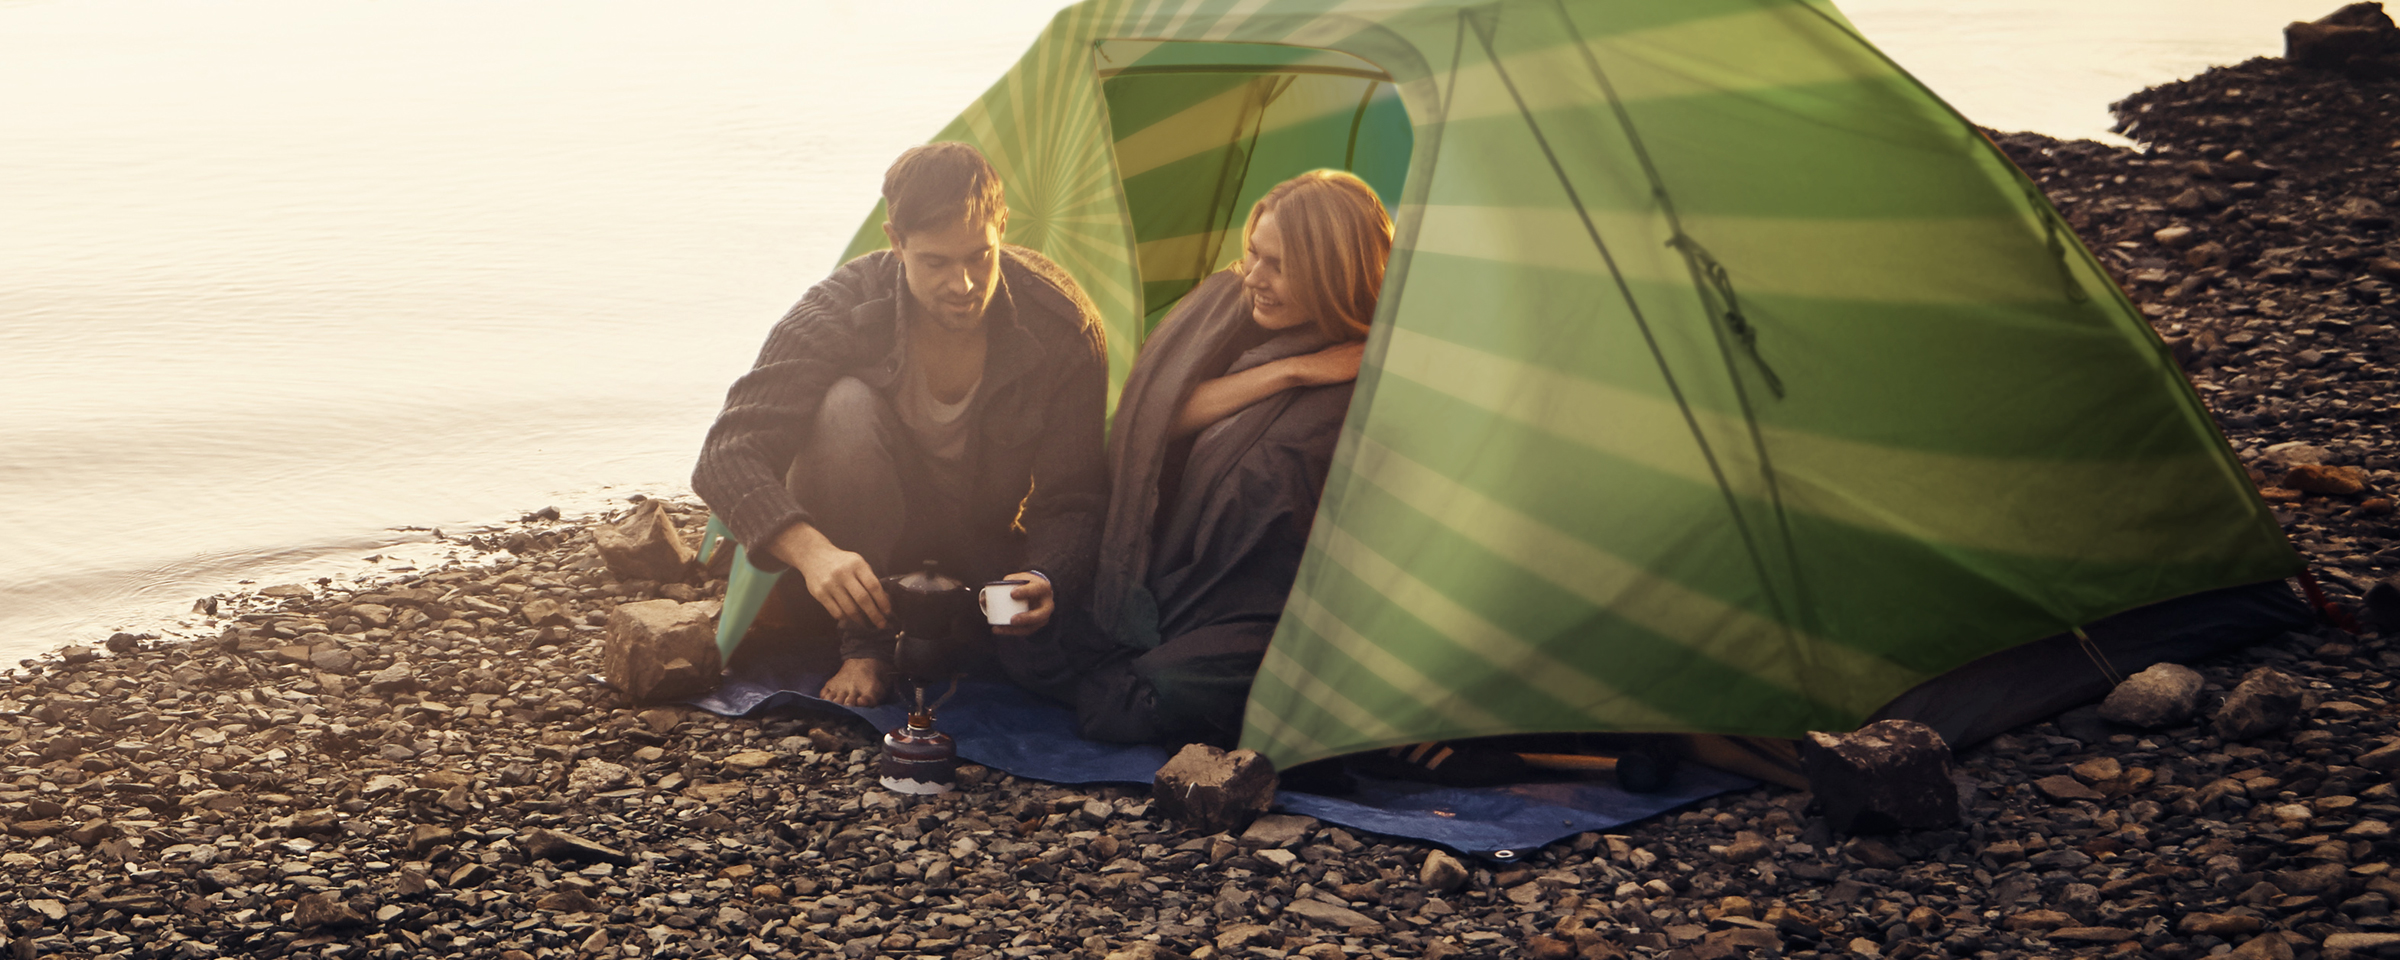 man and women sitting in camping tent by a lake